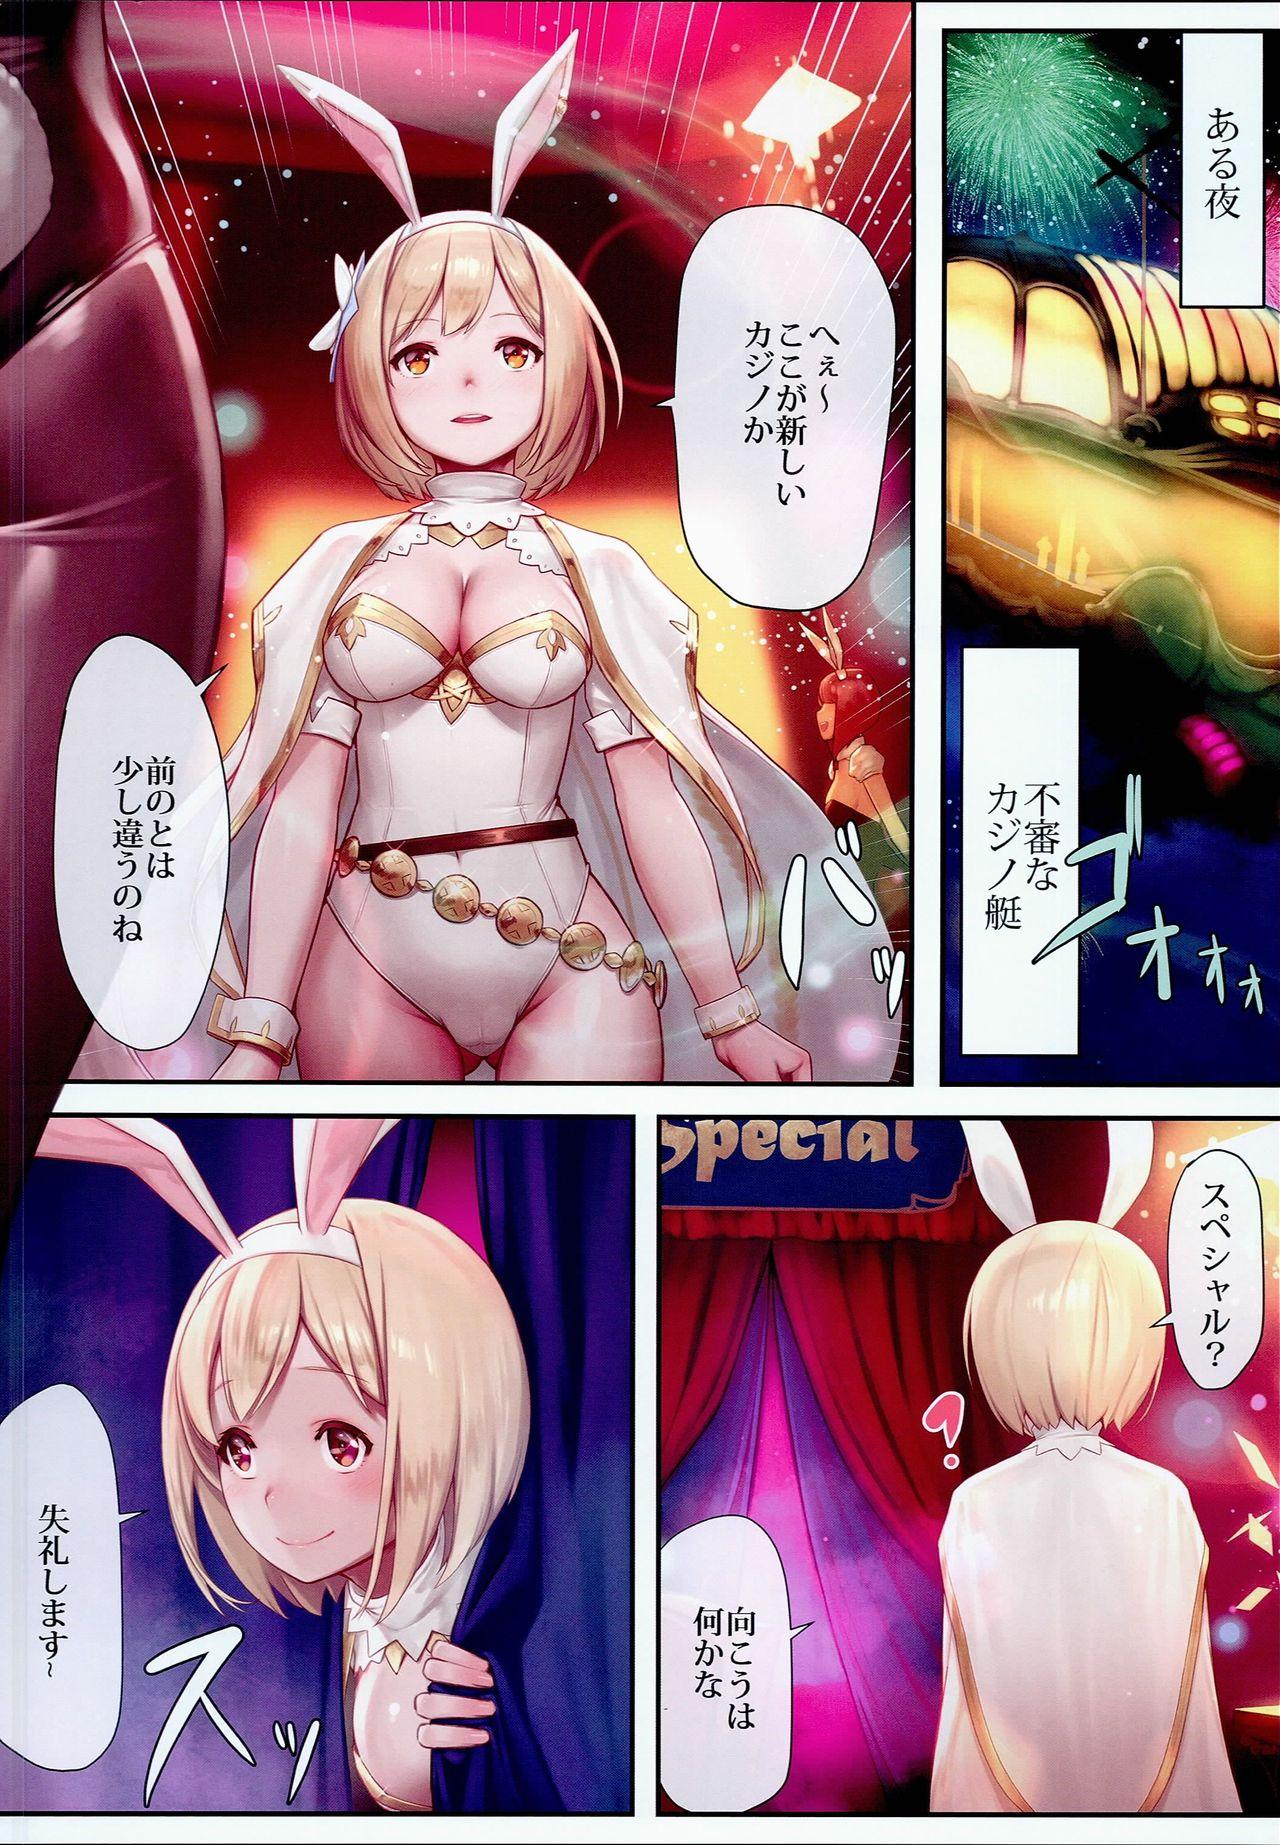 Free 18 Year Old Porn Gentle Blue Fantasy 3 - Granblue fantasy Guy - Page 4